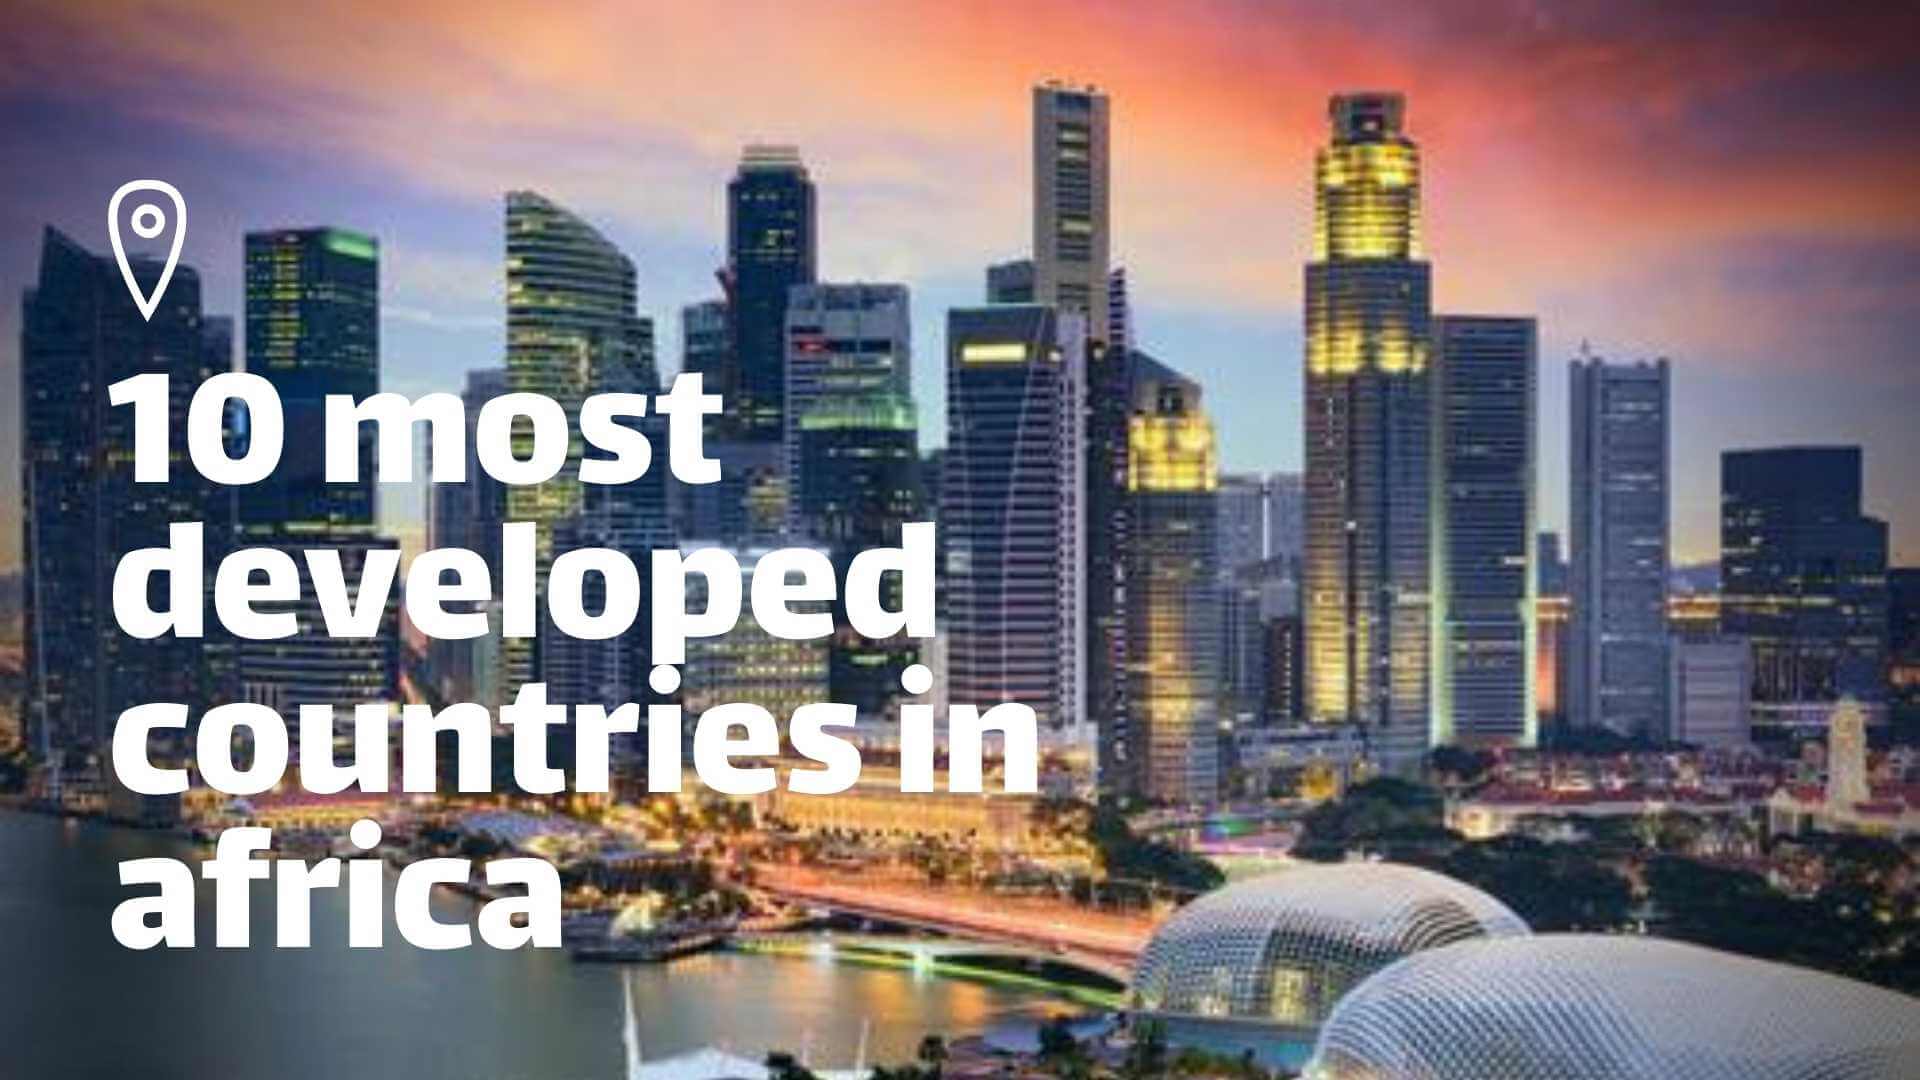 10 most developed countries in africa